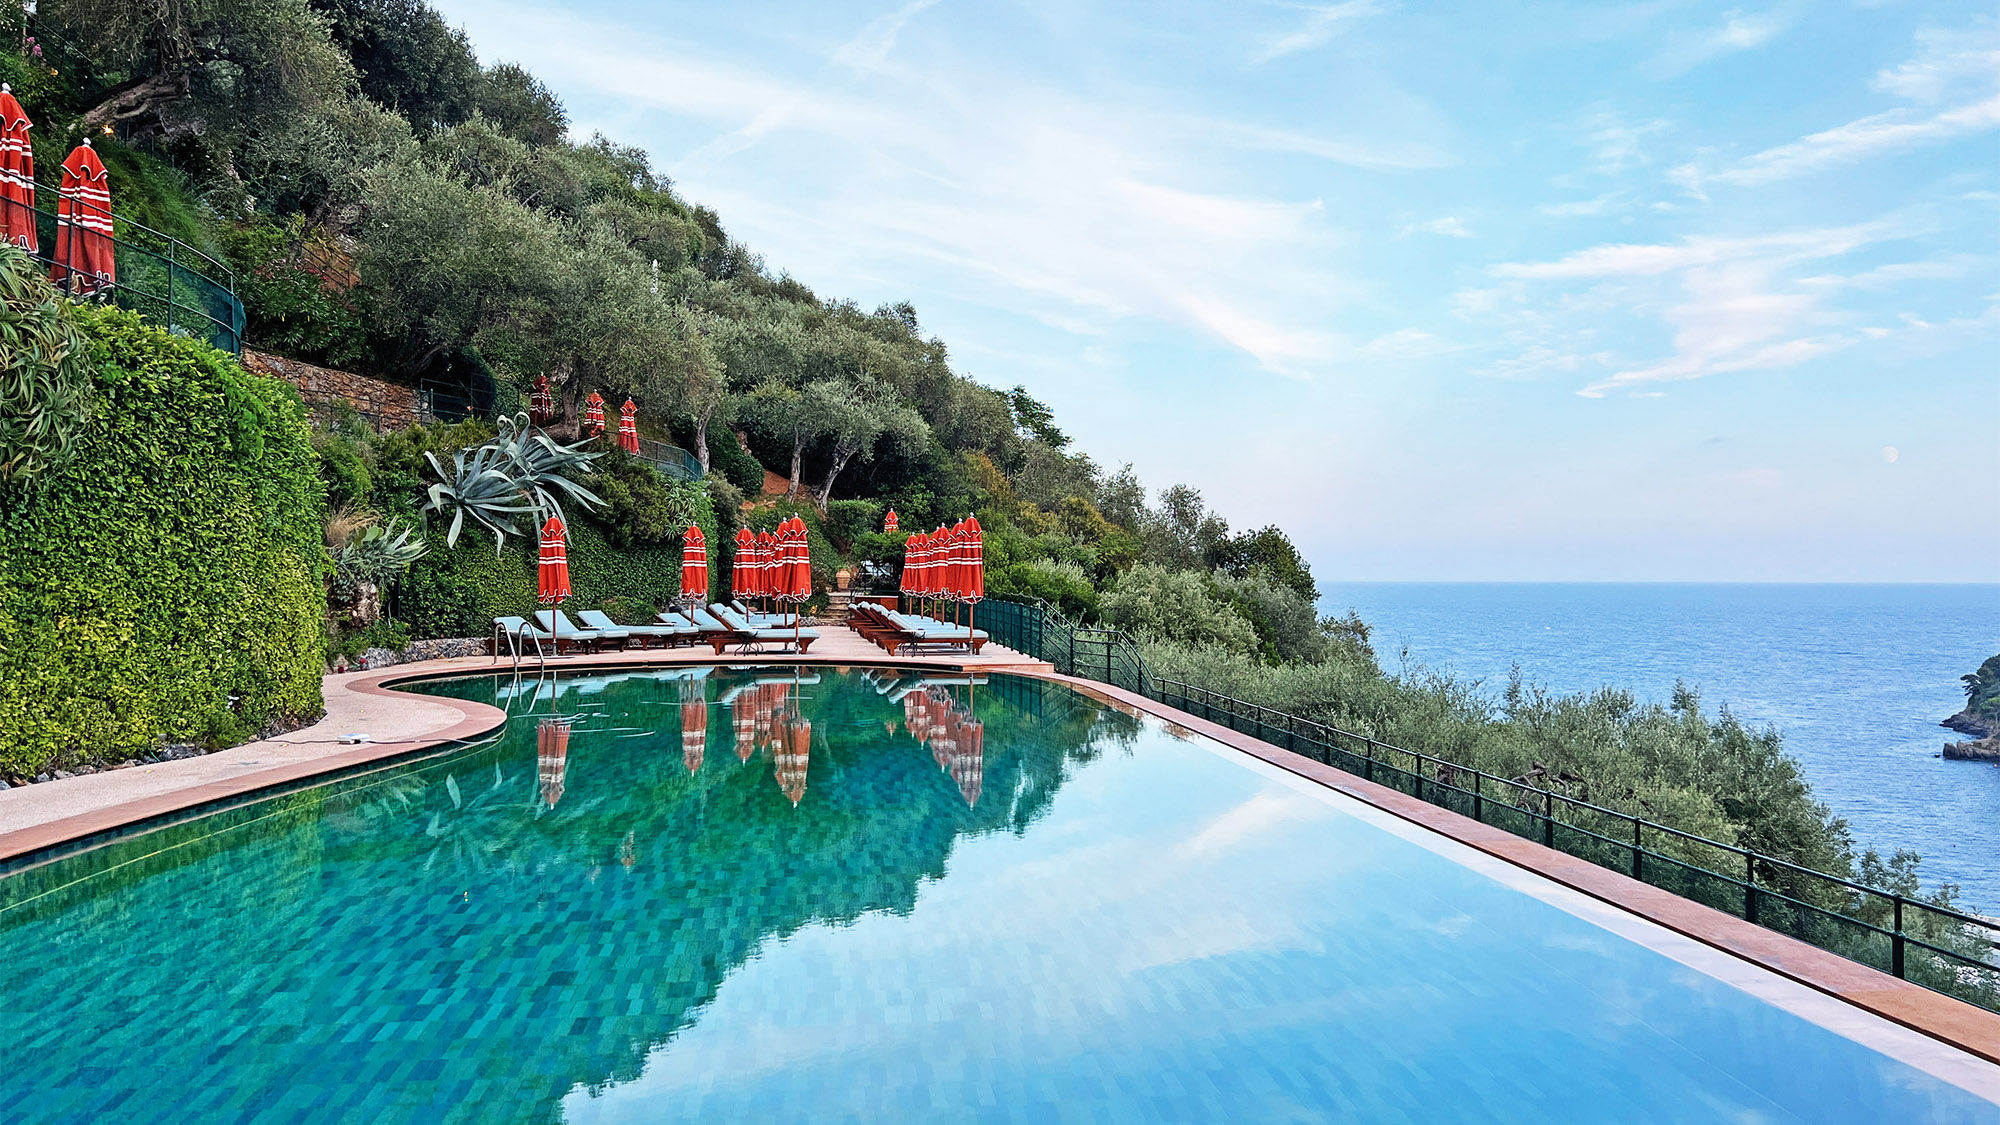 The refurbished infinity-edge pool contains tile work that is meant to mirror the color of the Ligurian Sea.